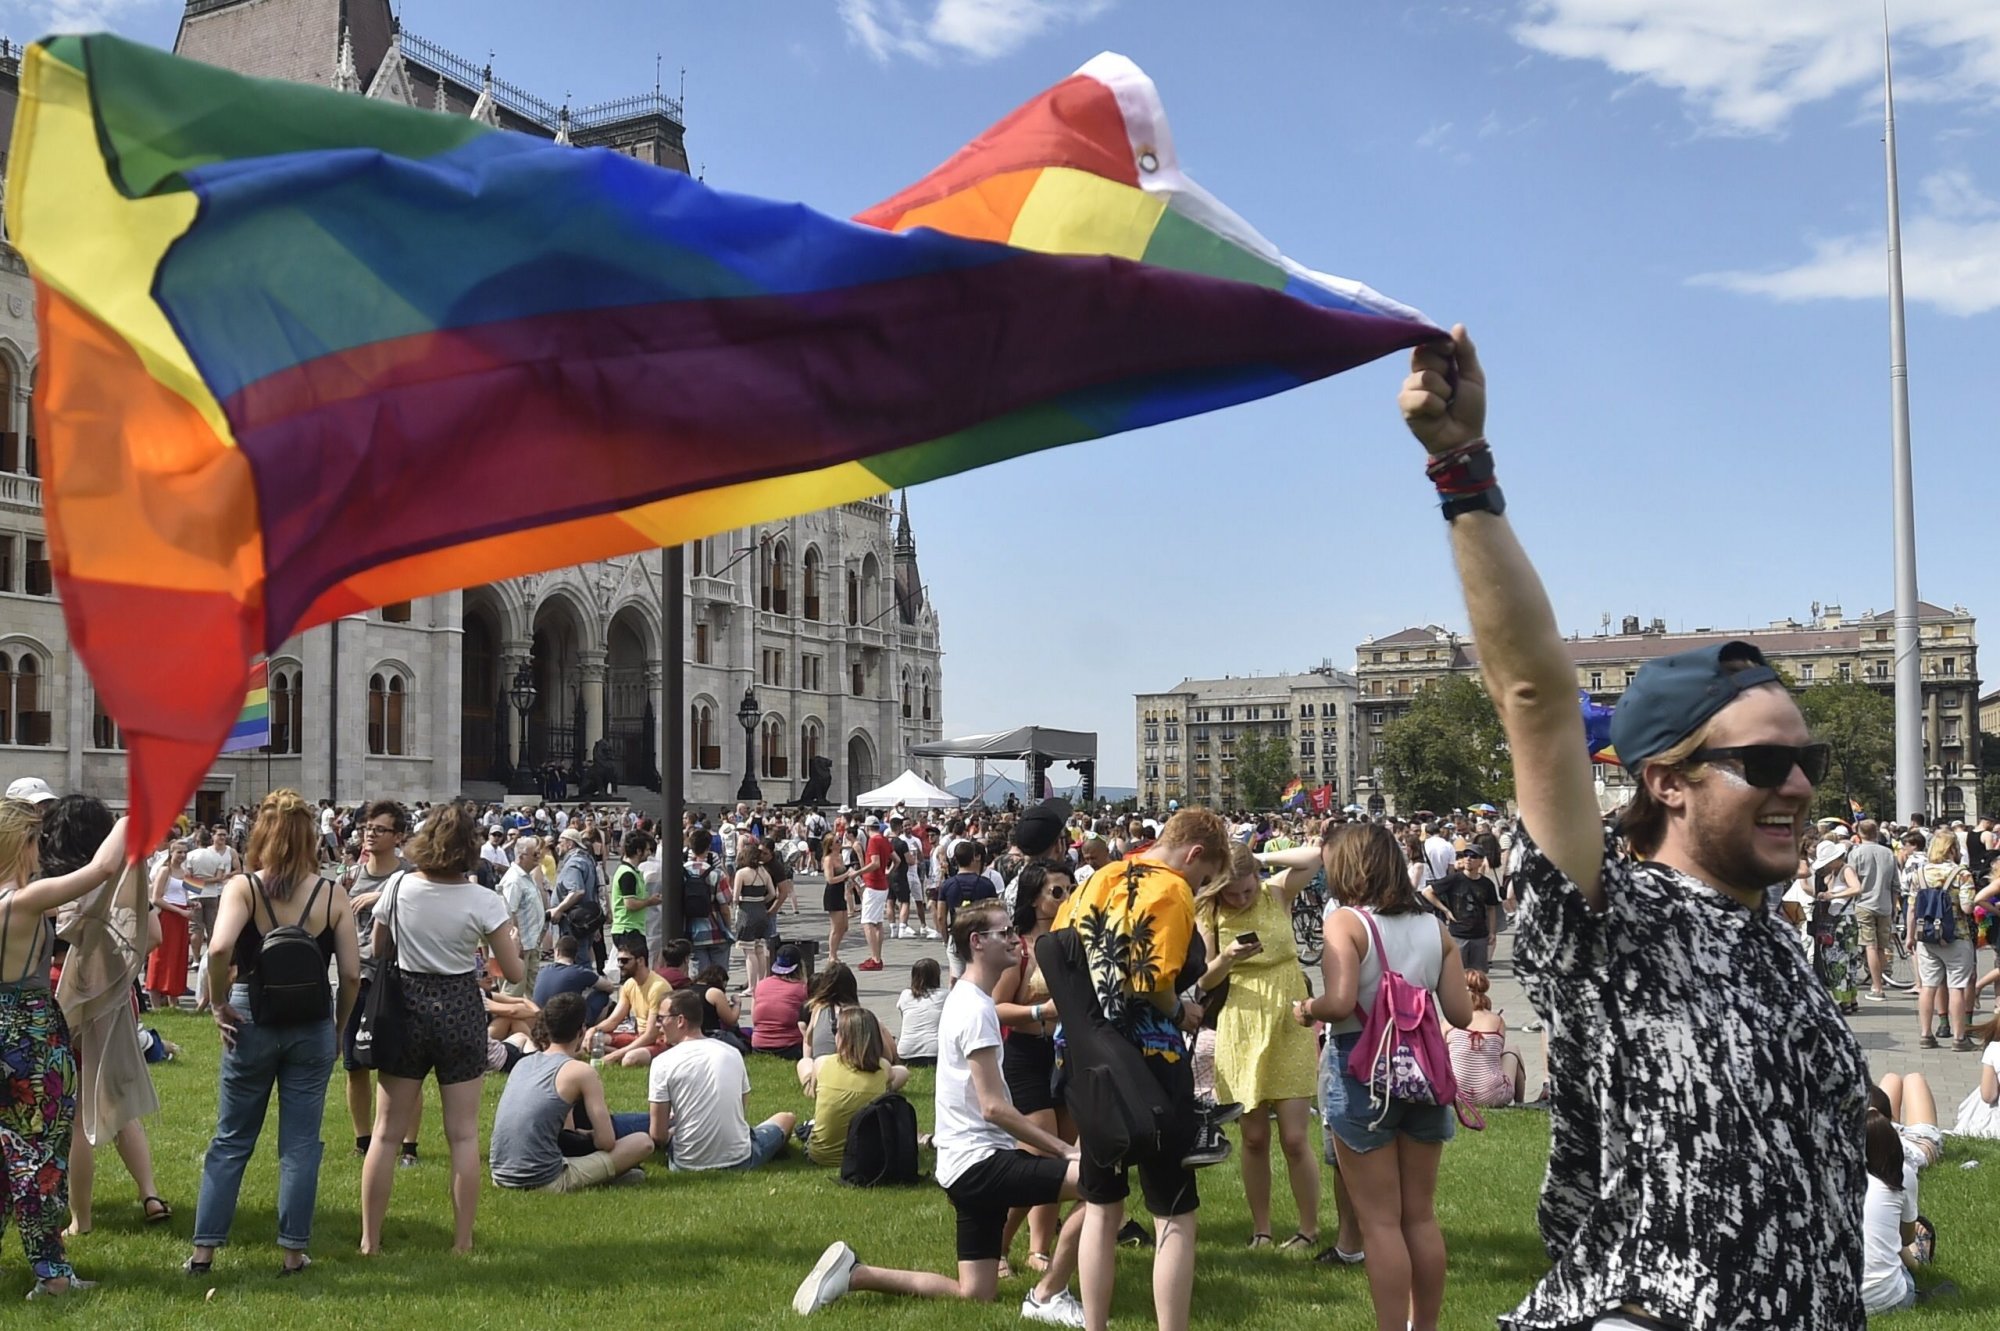 Minor Incidents and Controversial Statements Preceed 24th Budapest Pride - Hungary Today